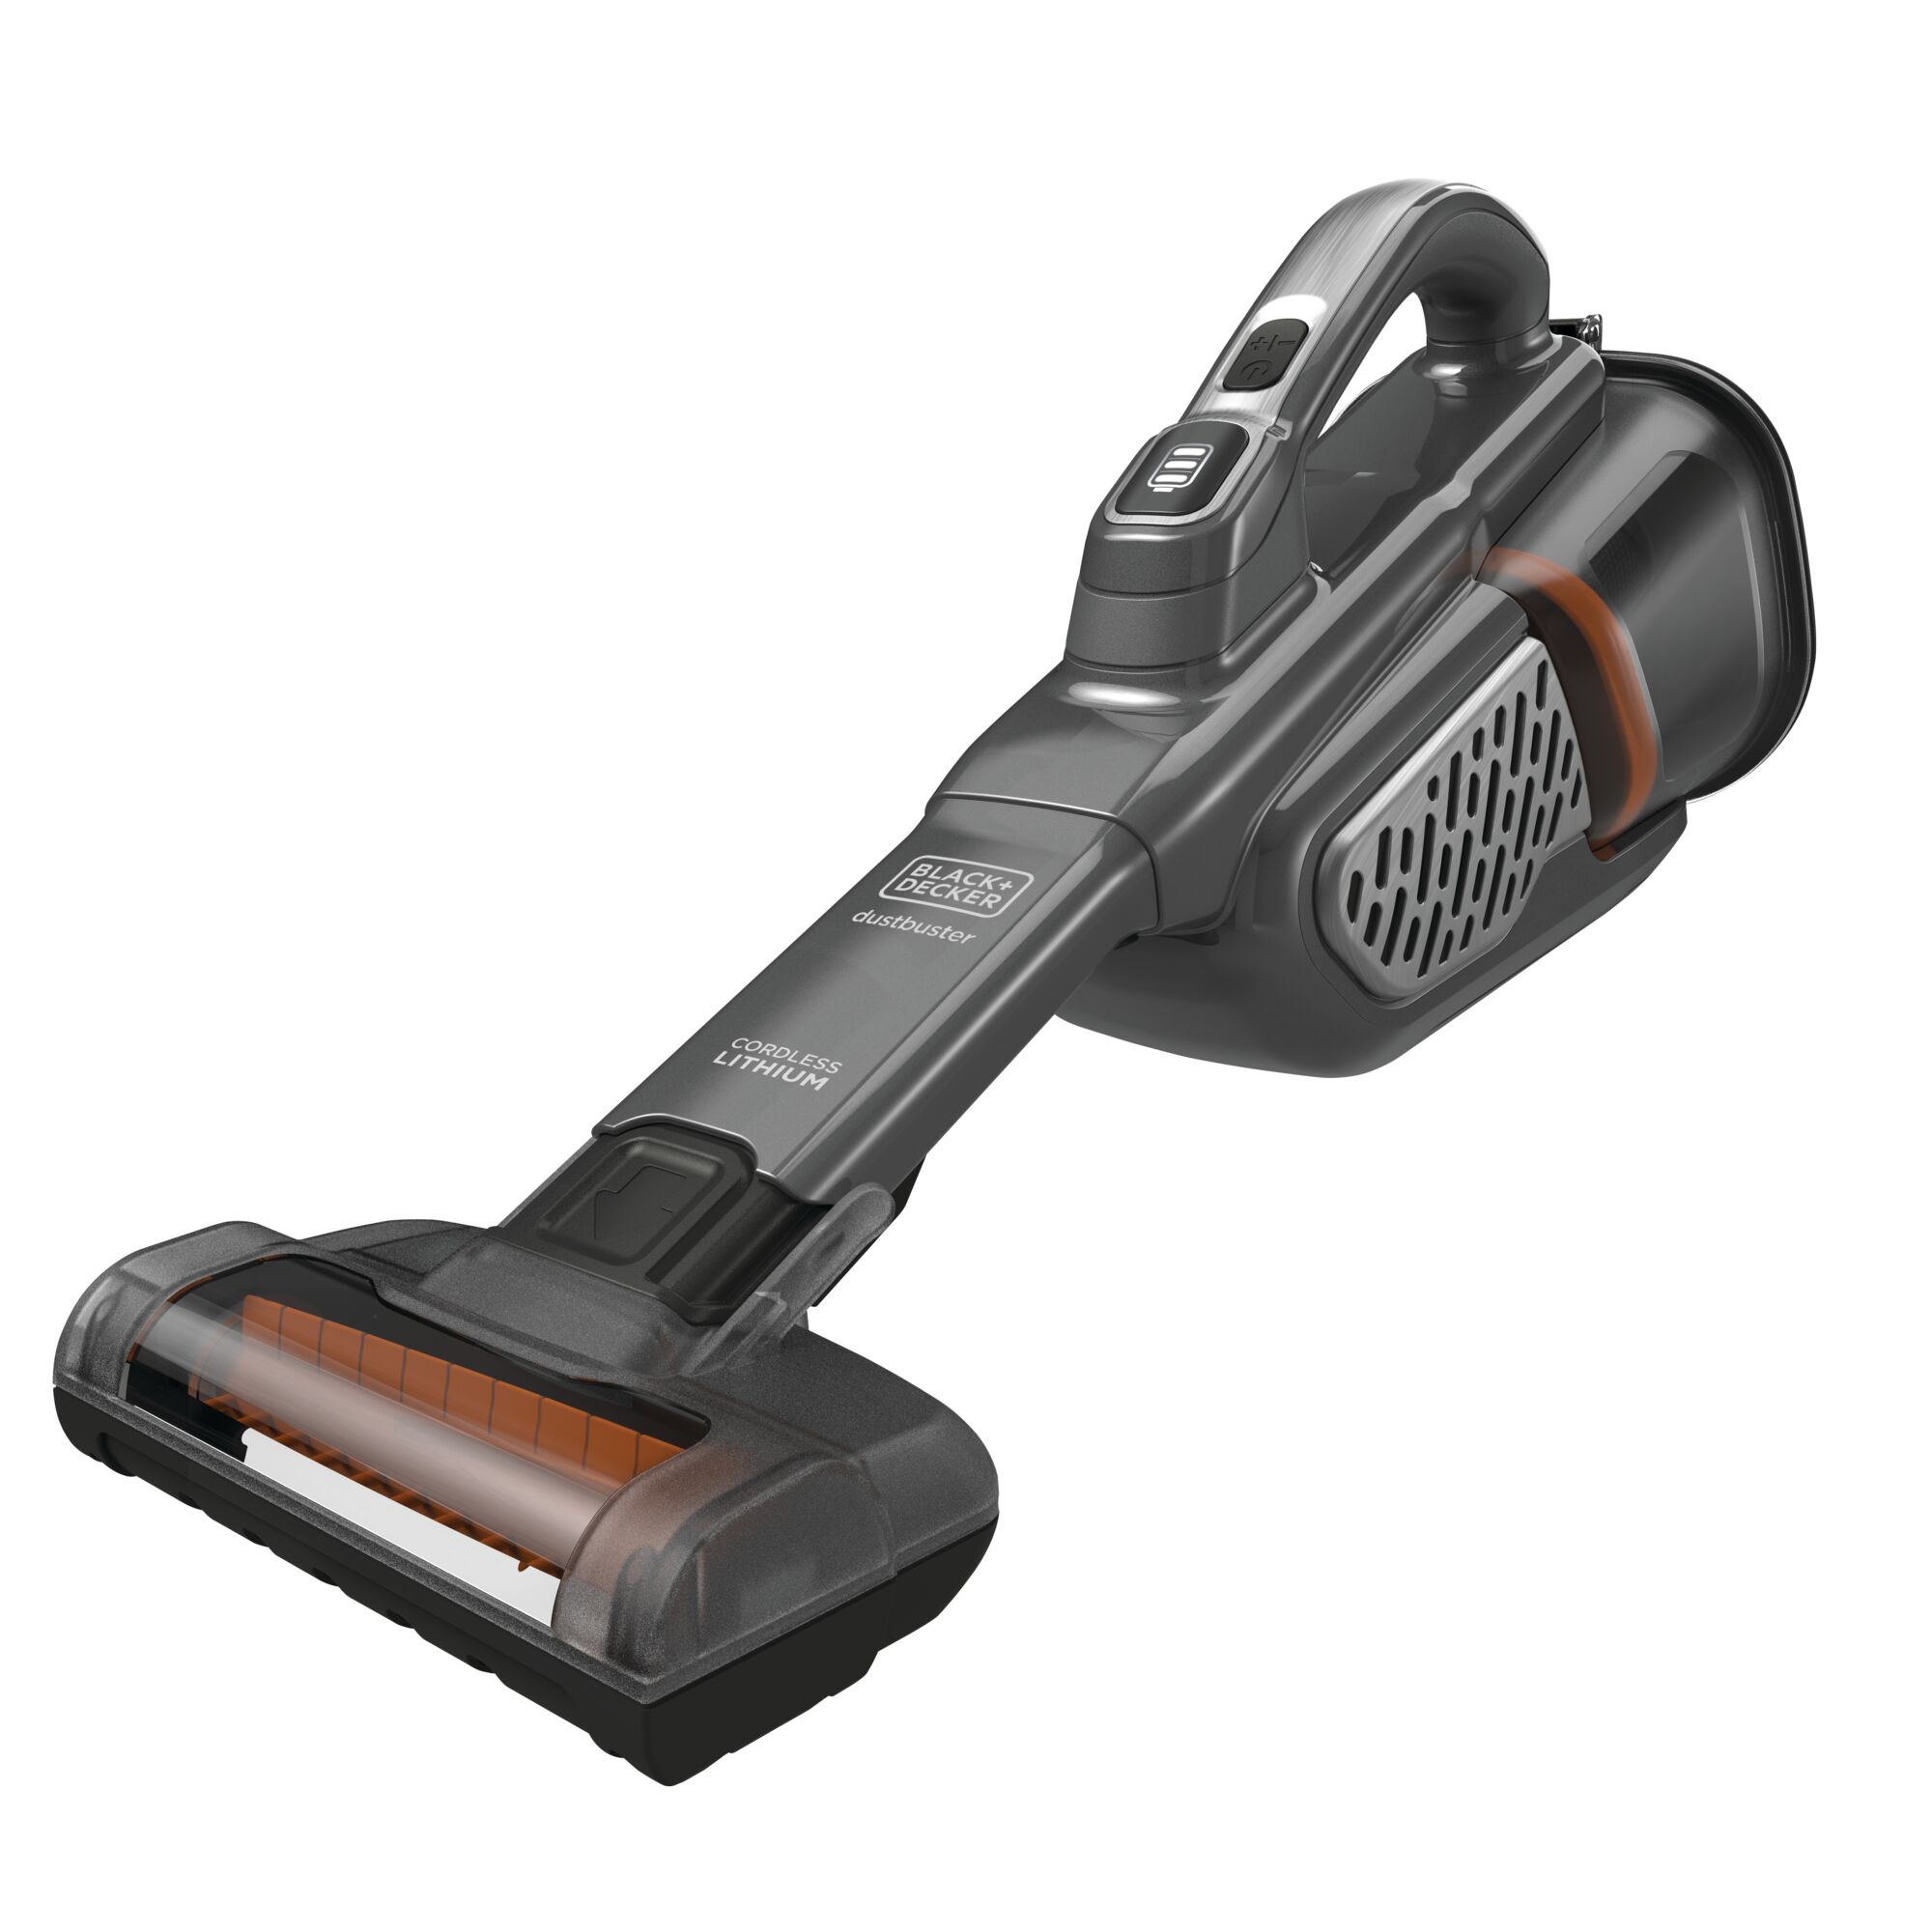 Profile of 12 volt MAX dustbuster Advanced Clean Cordless Hand Vacuum with Powered Pet Head.